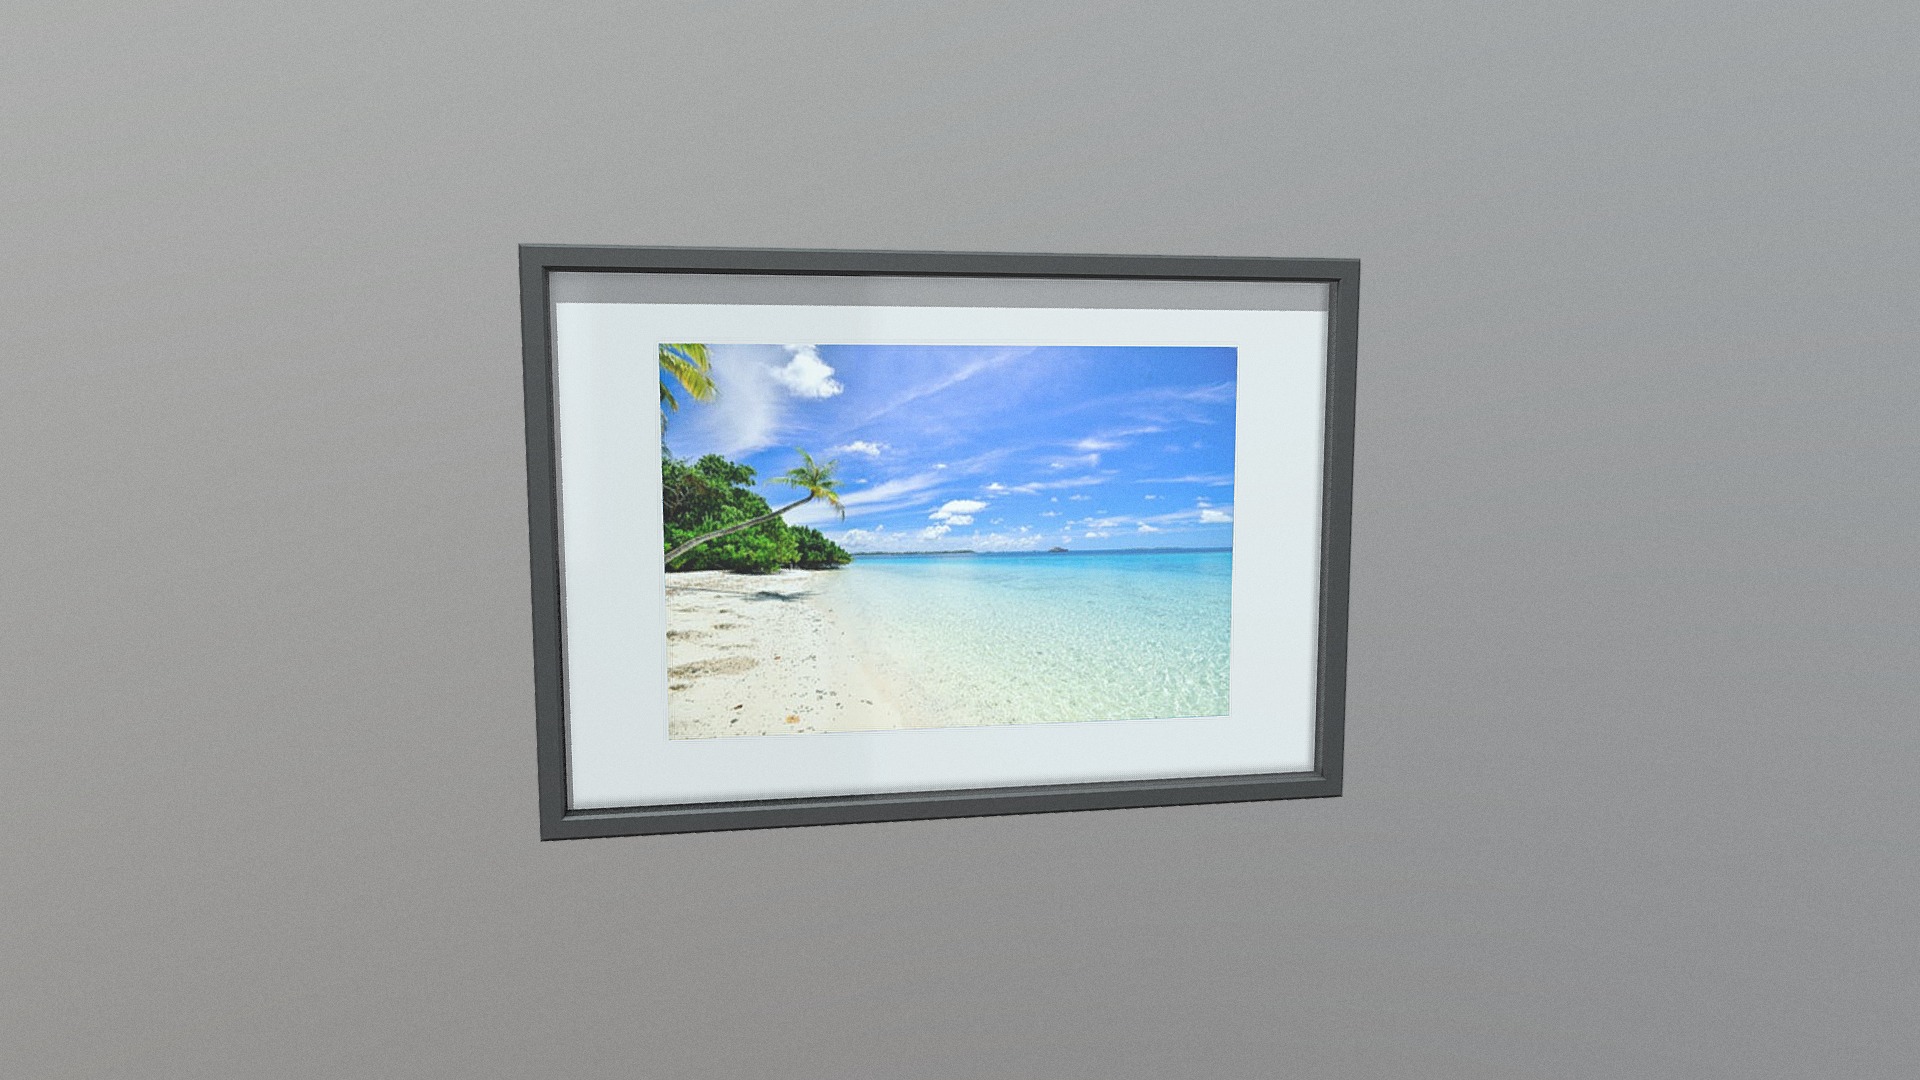 3D model Low Poly Picture Frame - This is a 3D model of the Low Poly Picture Frame. The 3D model is about a framed picture of a beach.